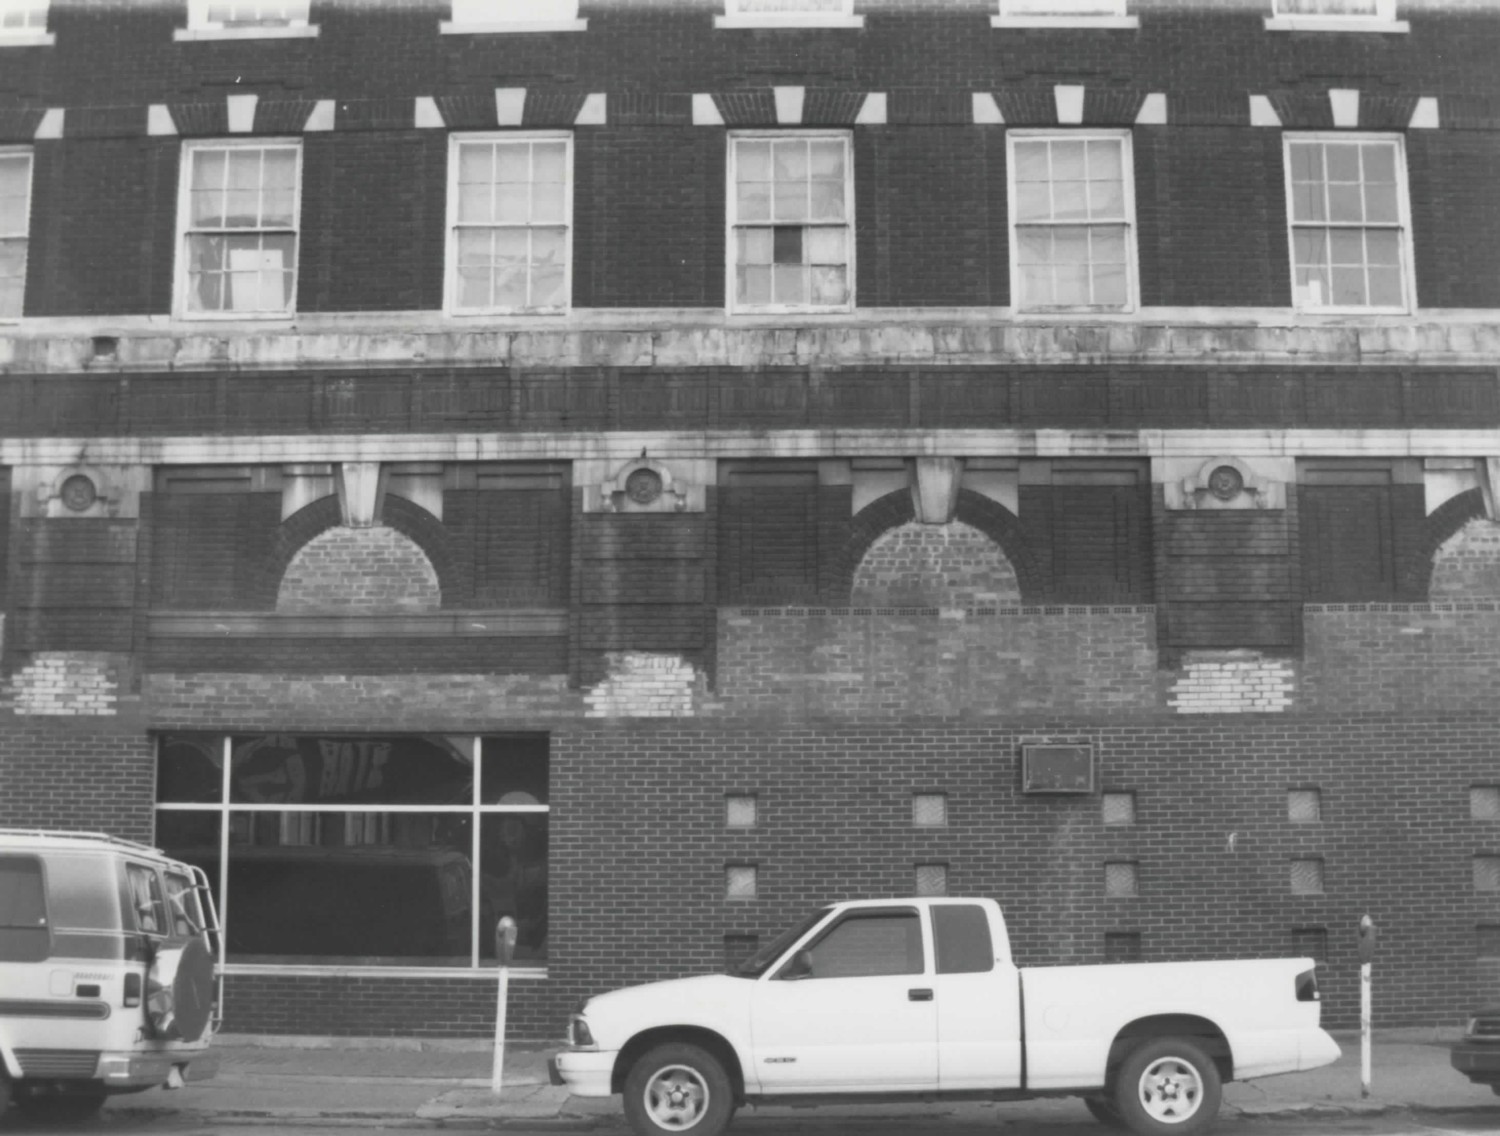 Marting Hotel, Ironton Ohio West elevation - first and second floor areas, mid-section (1998)